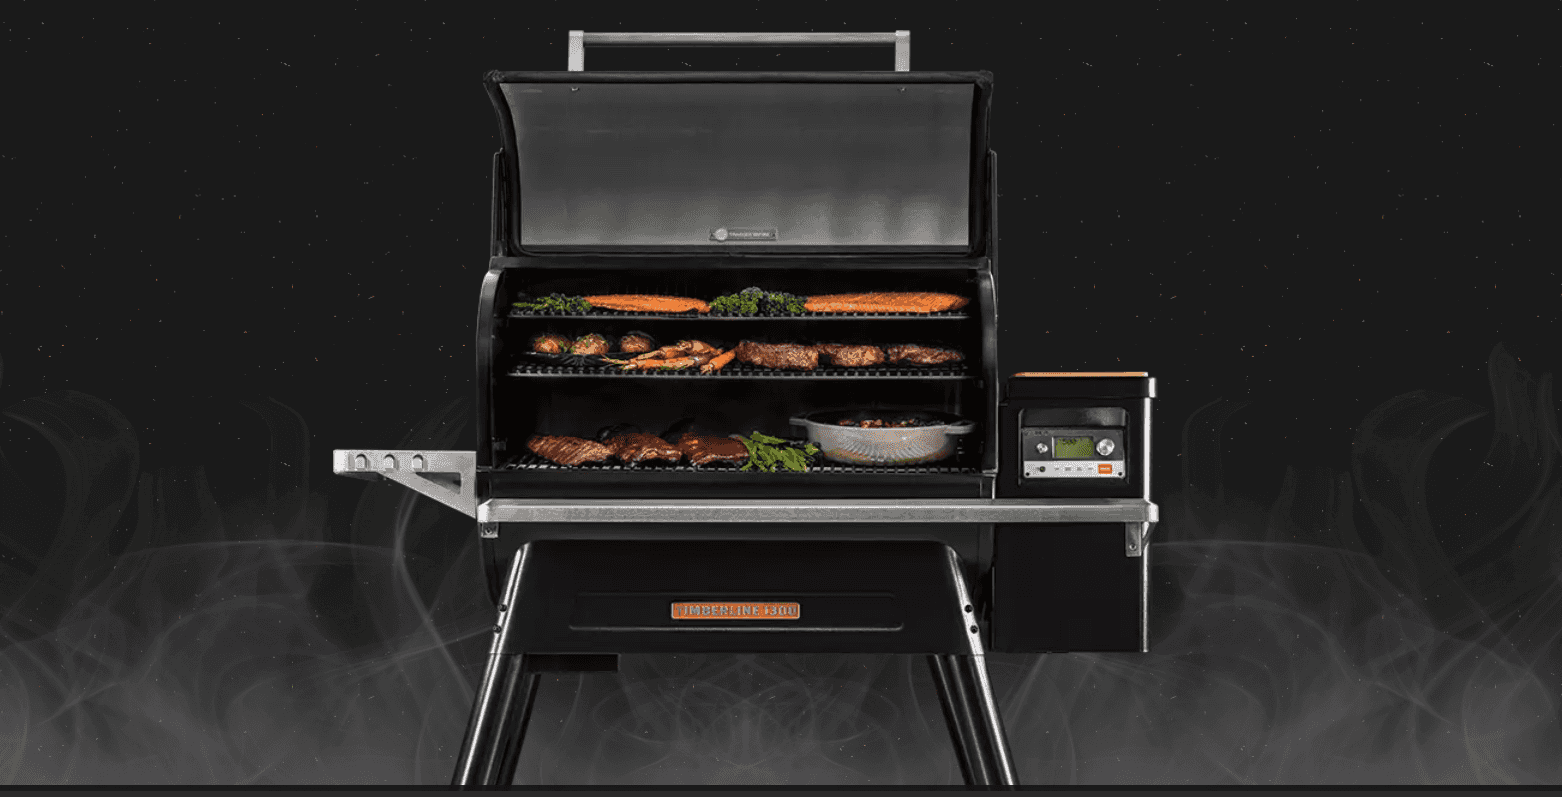 Where Are Traeger Grills Made?